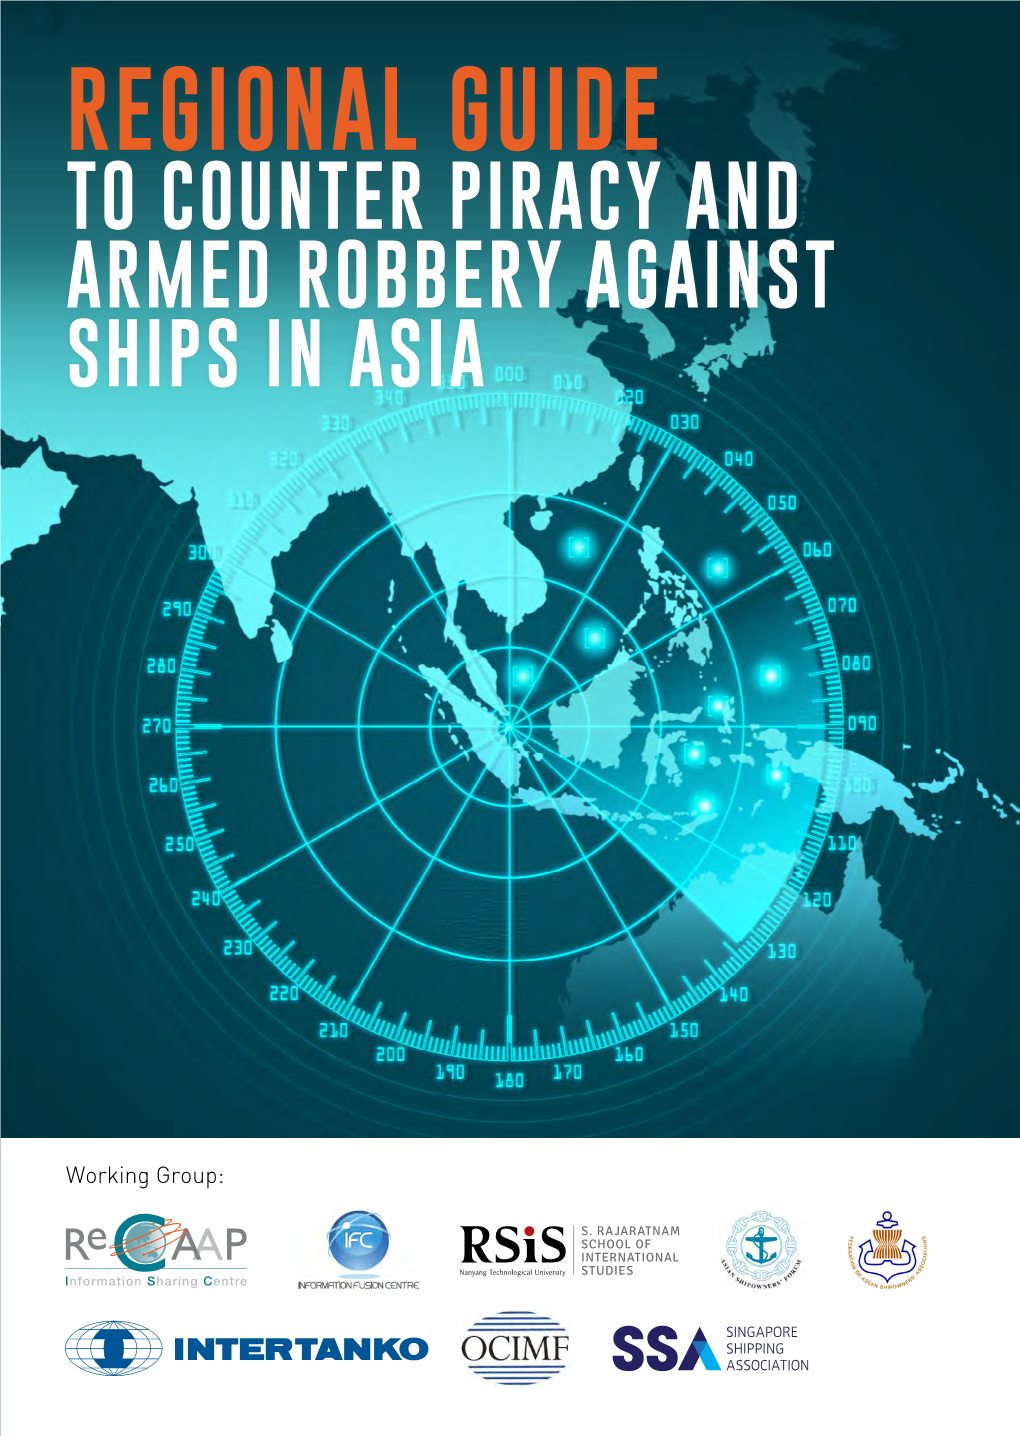 Regional Guide to Counter Piracy and Armed Robbery Against Ships in Asia